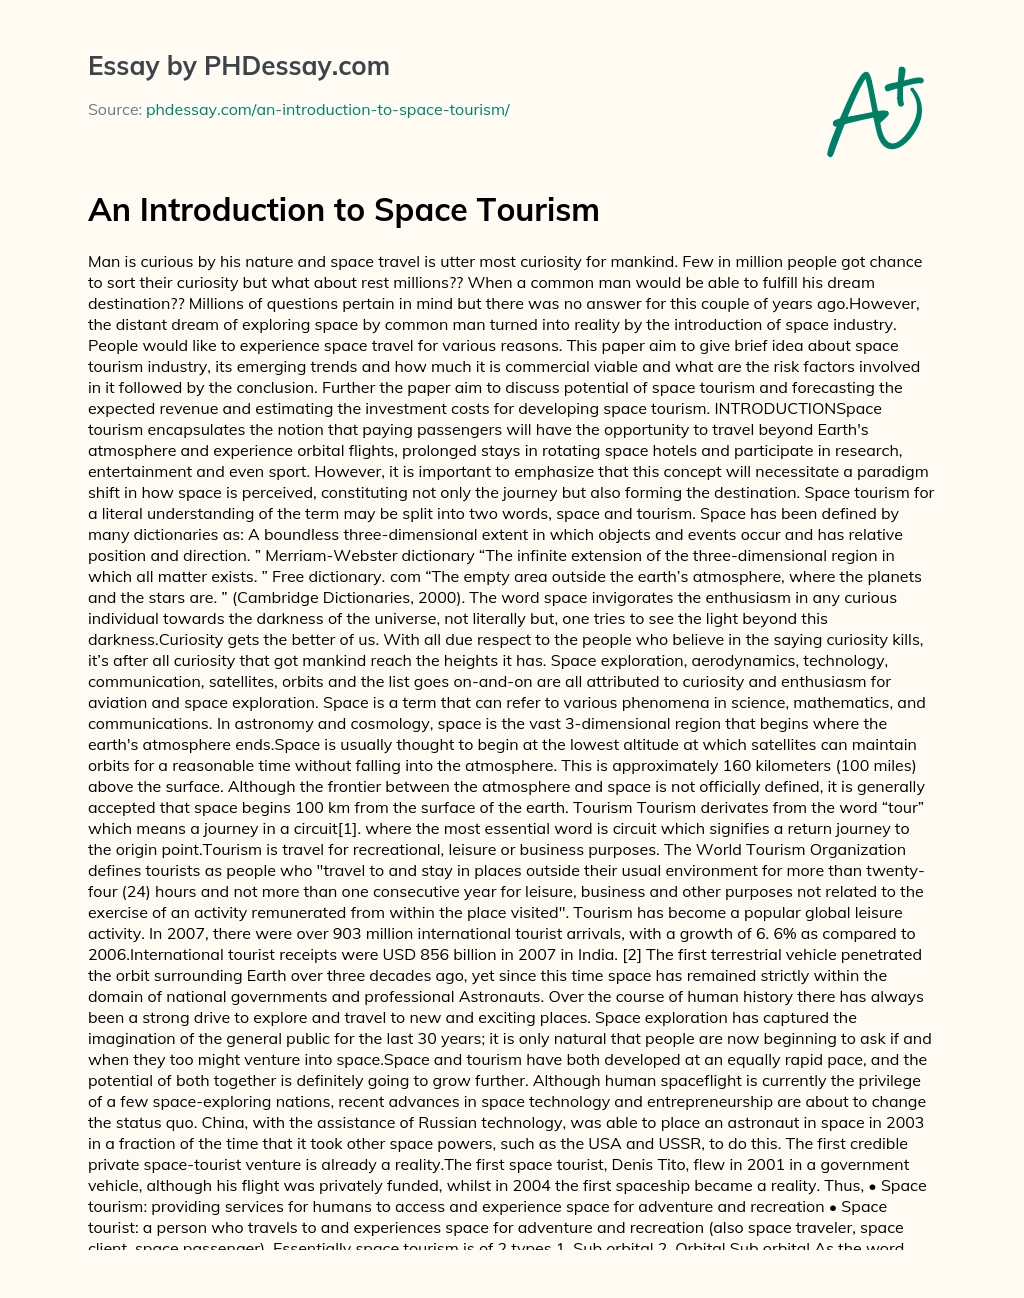 An Introduction to Space Tourism essay